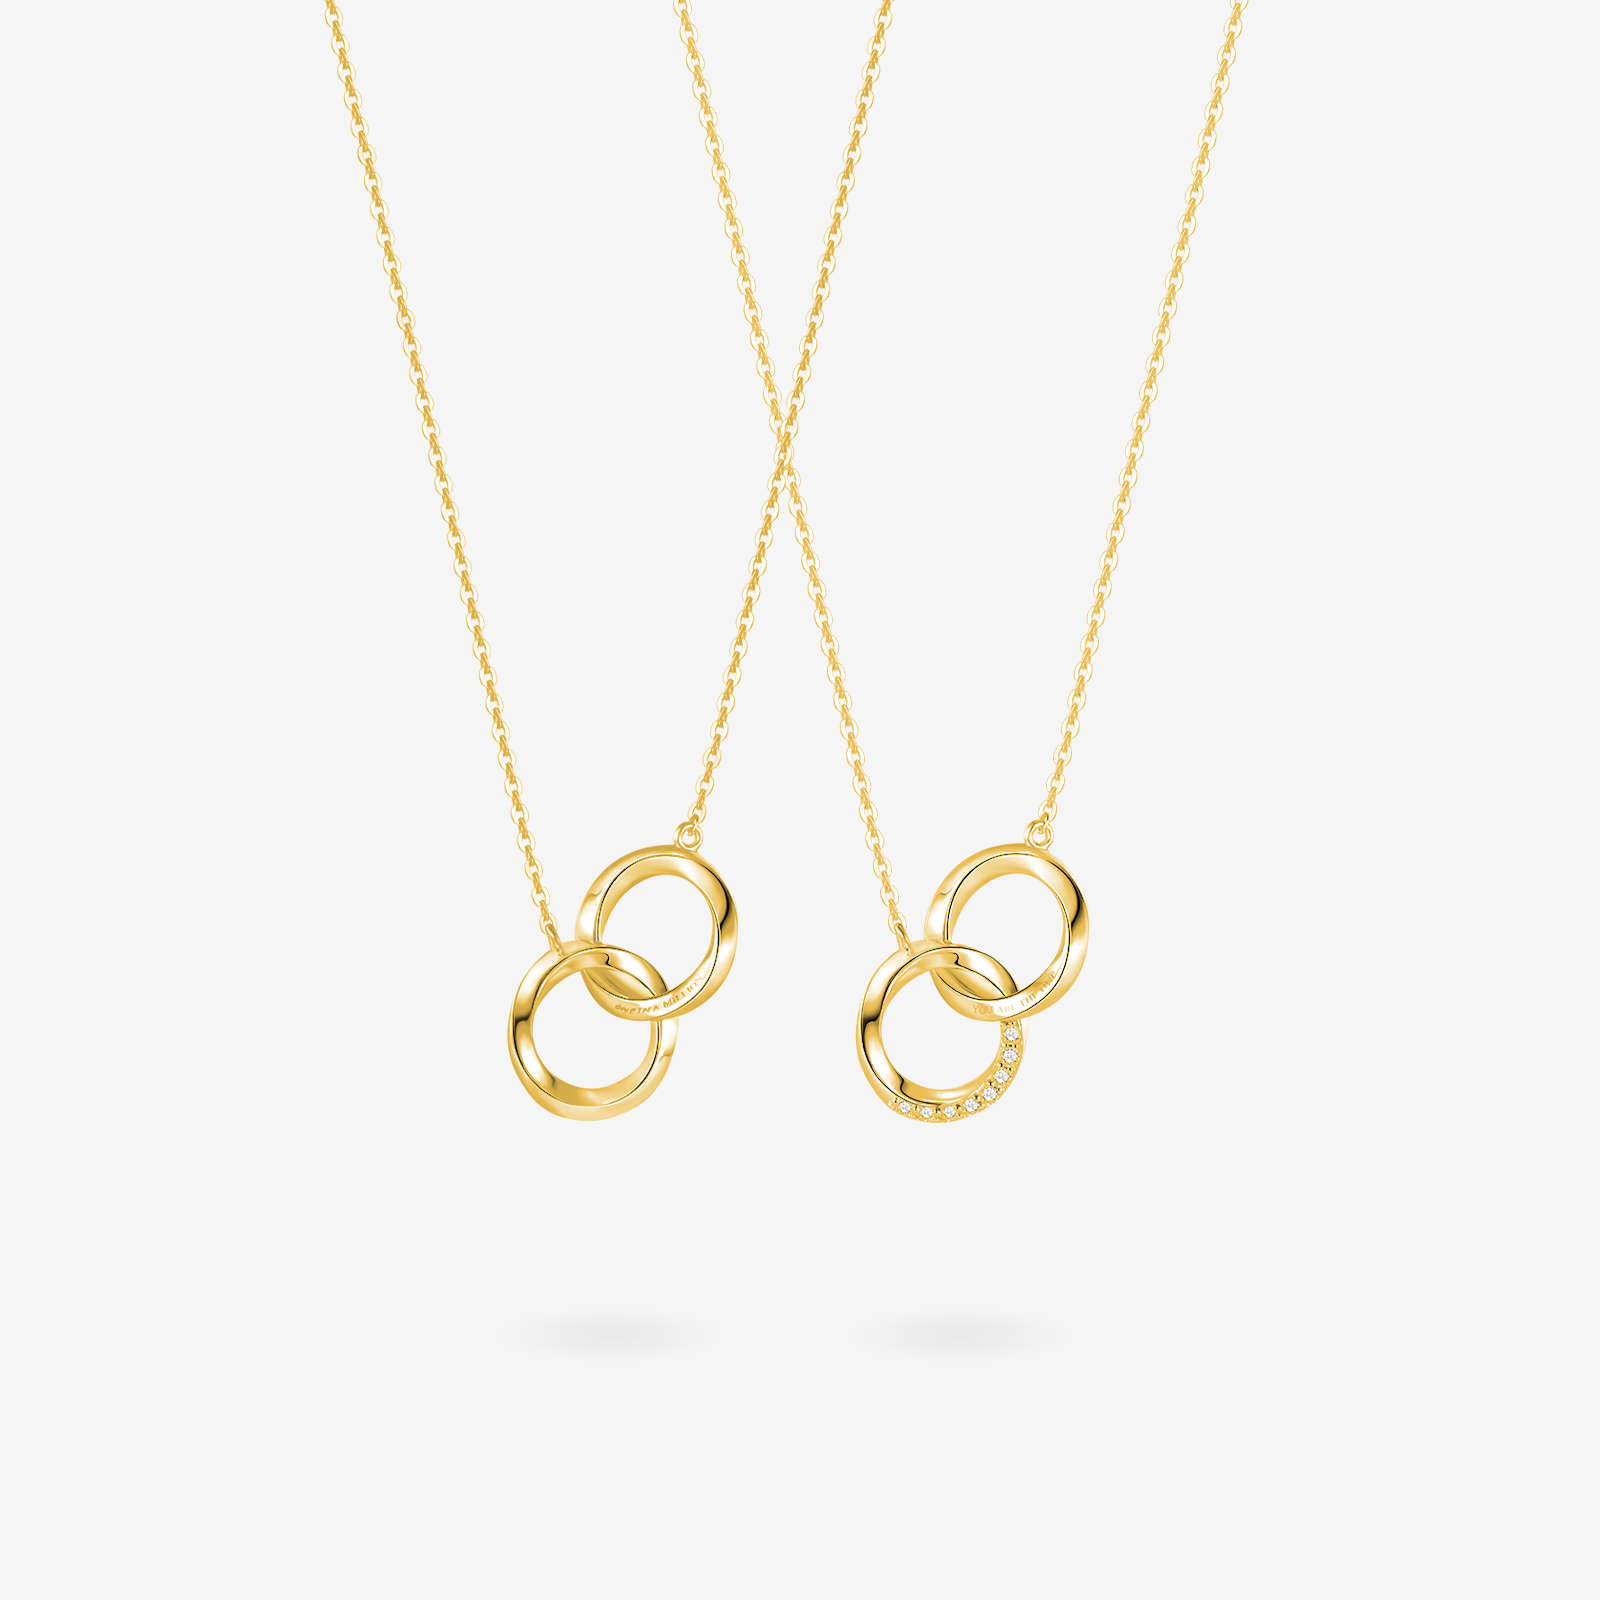 FANCIME "Connected" Mobius Matching Ring Sterling Silver Necklace